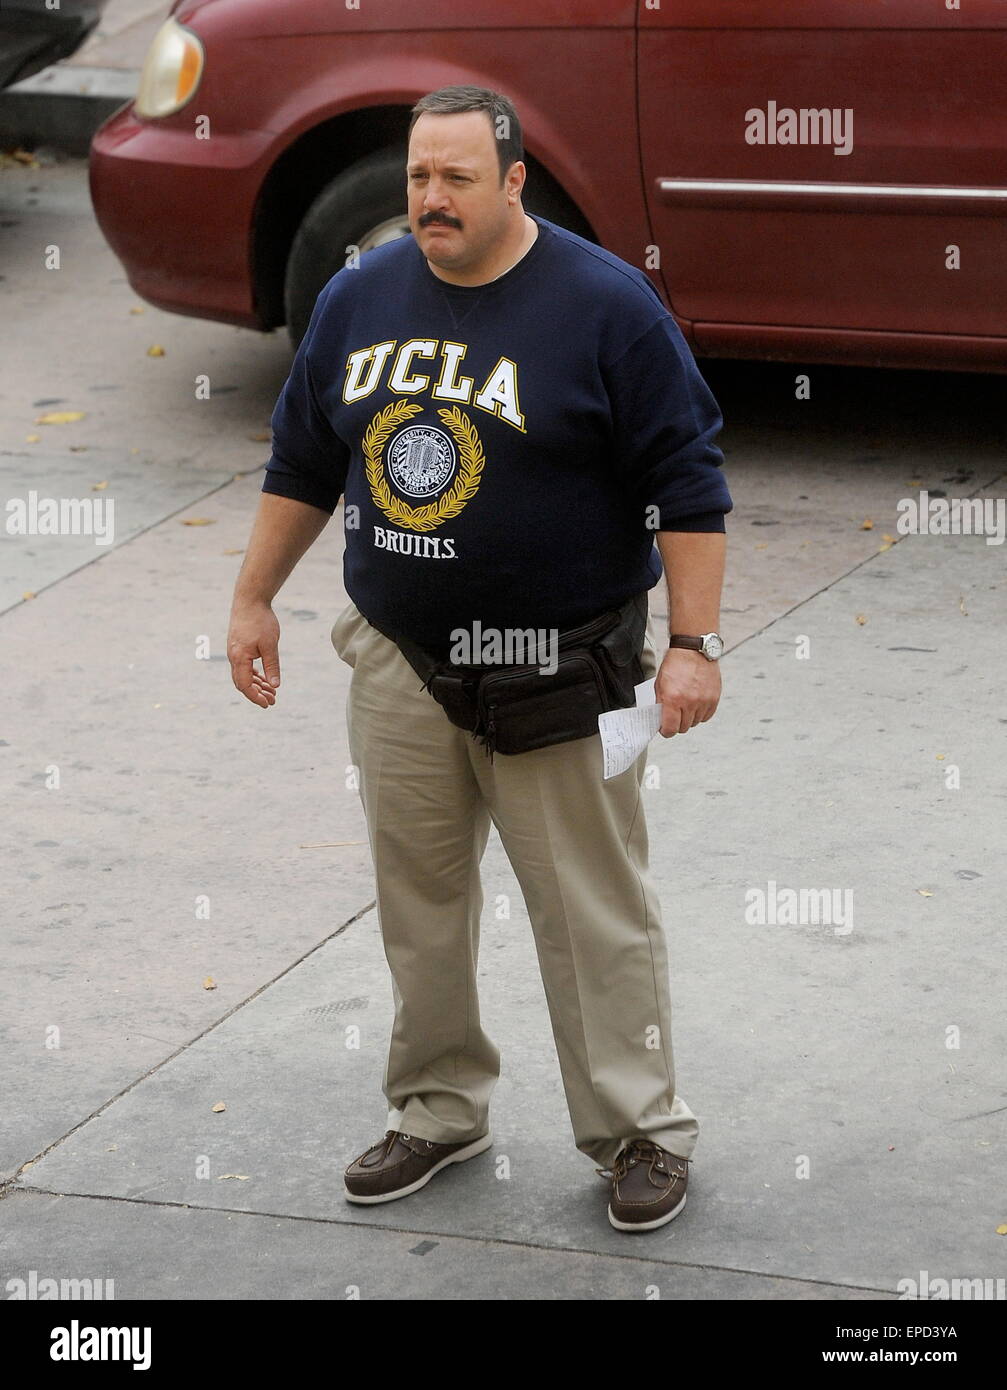 Comedian actor Kevin James filming his sequel 'Paul Blart: Mall Cop 2' in WestWood Ca.  Featuring: Kevin James Where: West Wood, California, United States When: 11 Nov 2014 Credit: Cousart/JFXimages/WENN.com Stock Photo